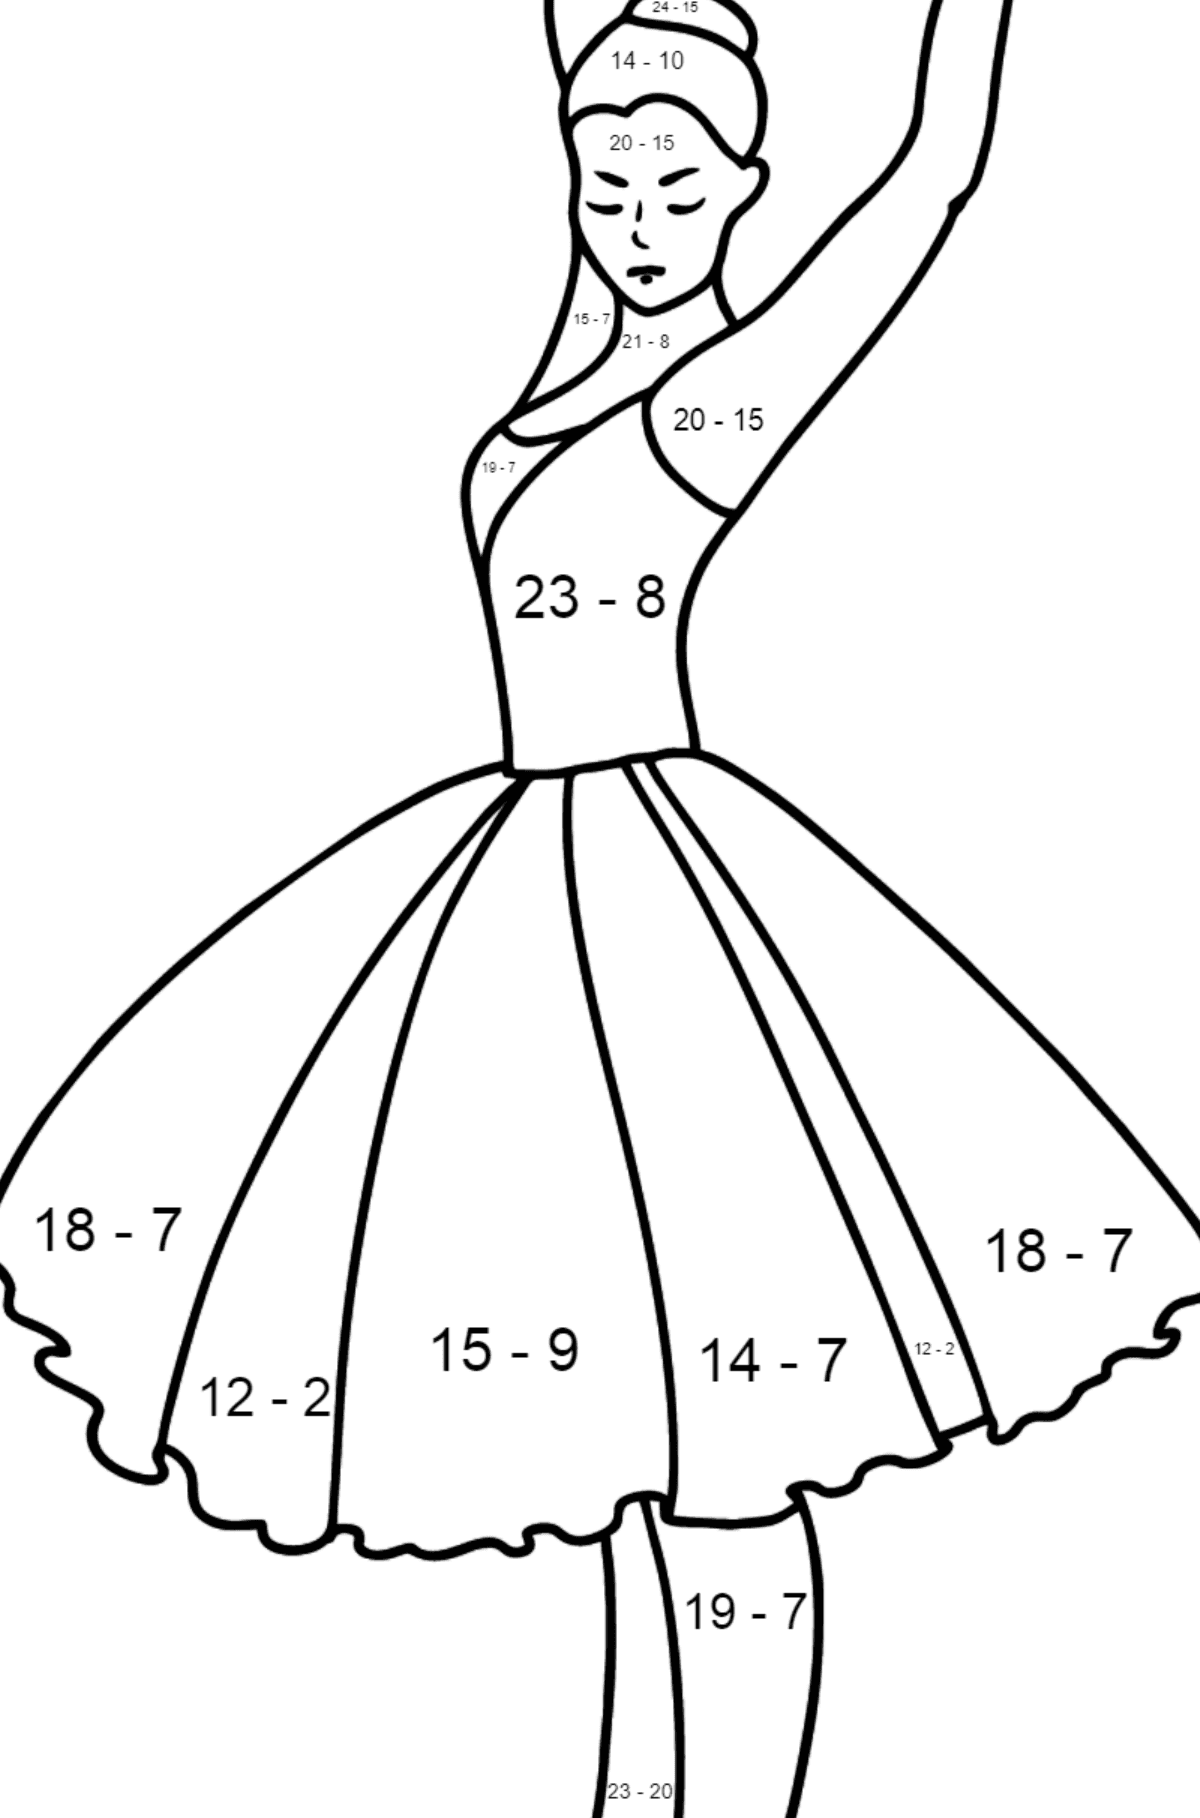 Ballerina Dancing coloring page - Math Coloring - Subtraction for Kids